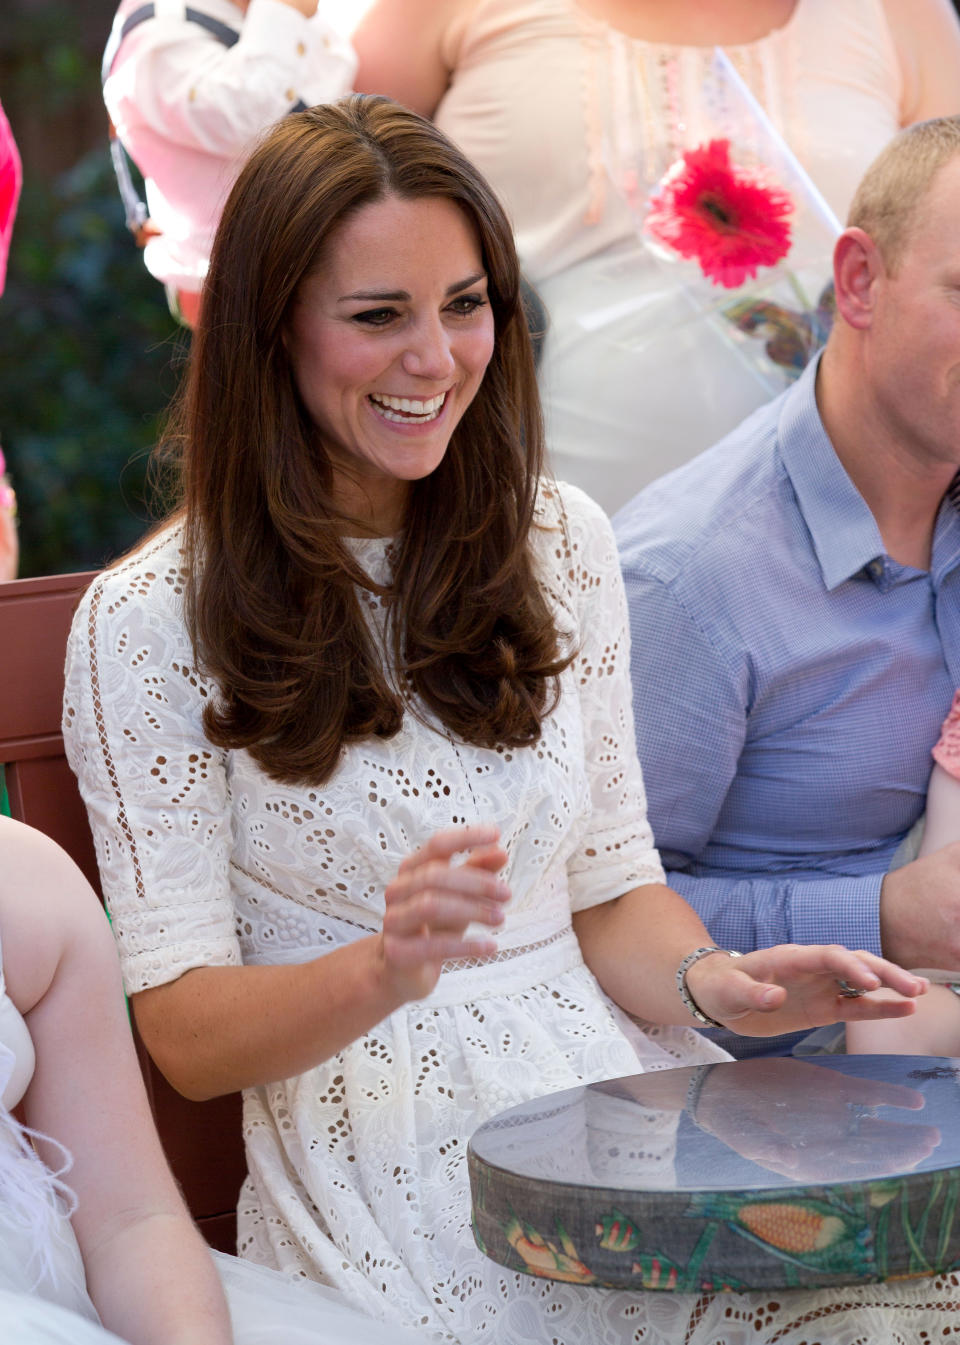 The Duchess of Cambridge at Bear Cottage in 2014. Source: Getty